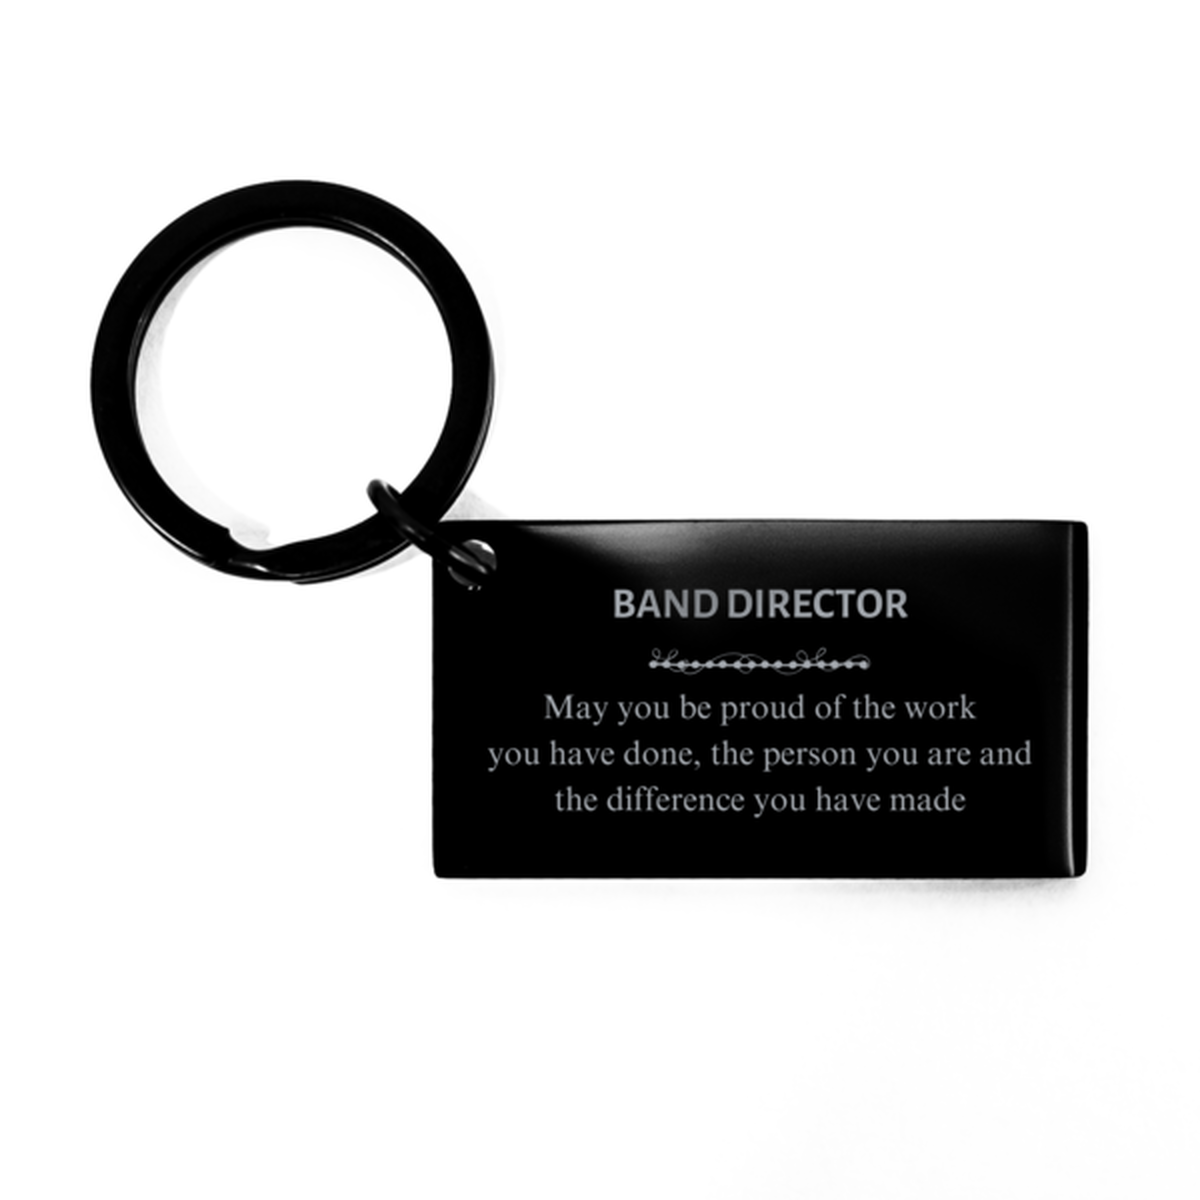 CPA May you be proud of the work you have done, Retirement Band Director Keychain for Colleague Appreciation Gifts Amazing for Band Director